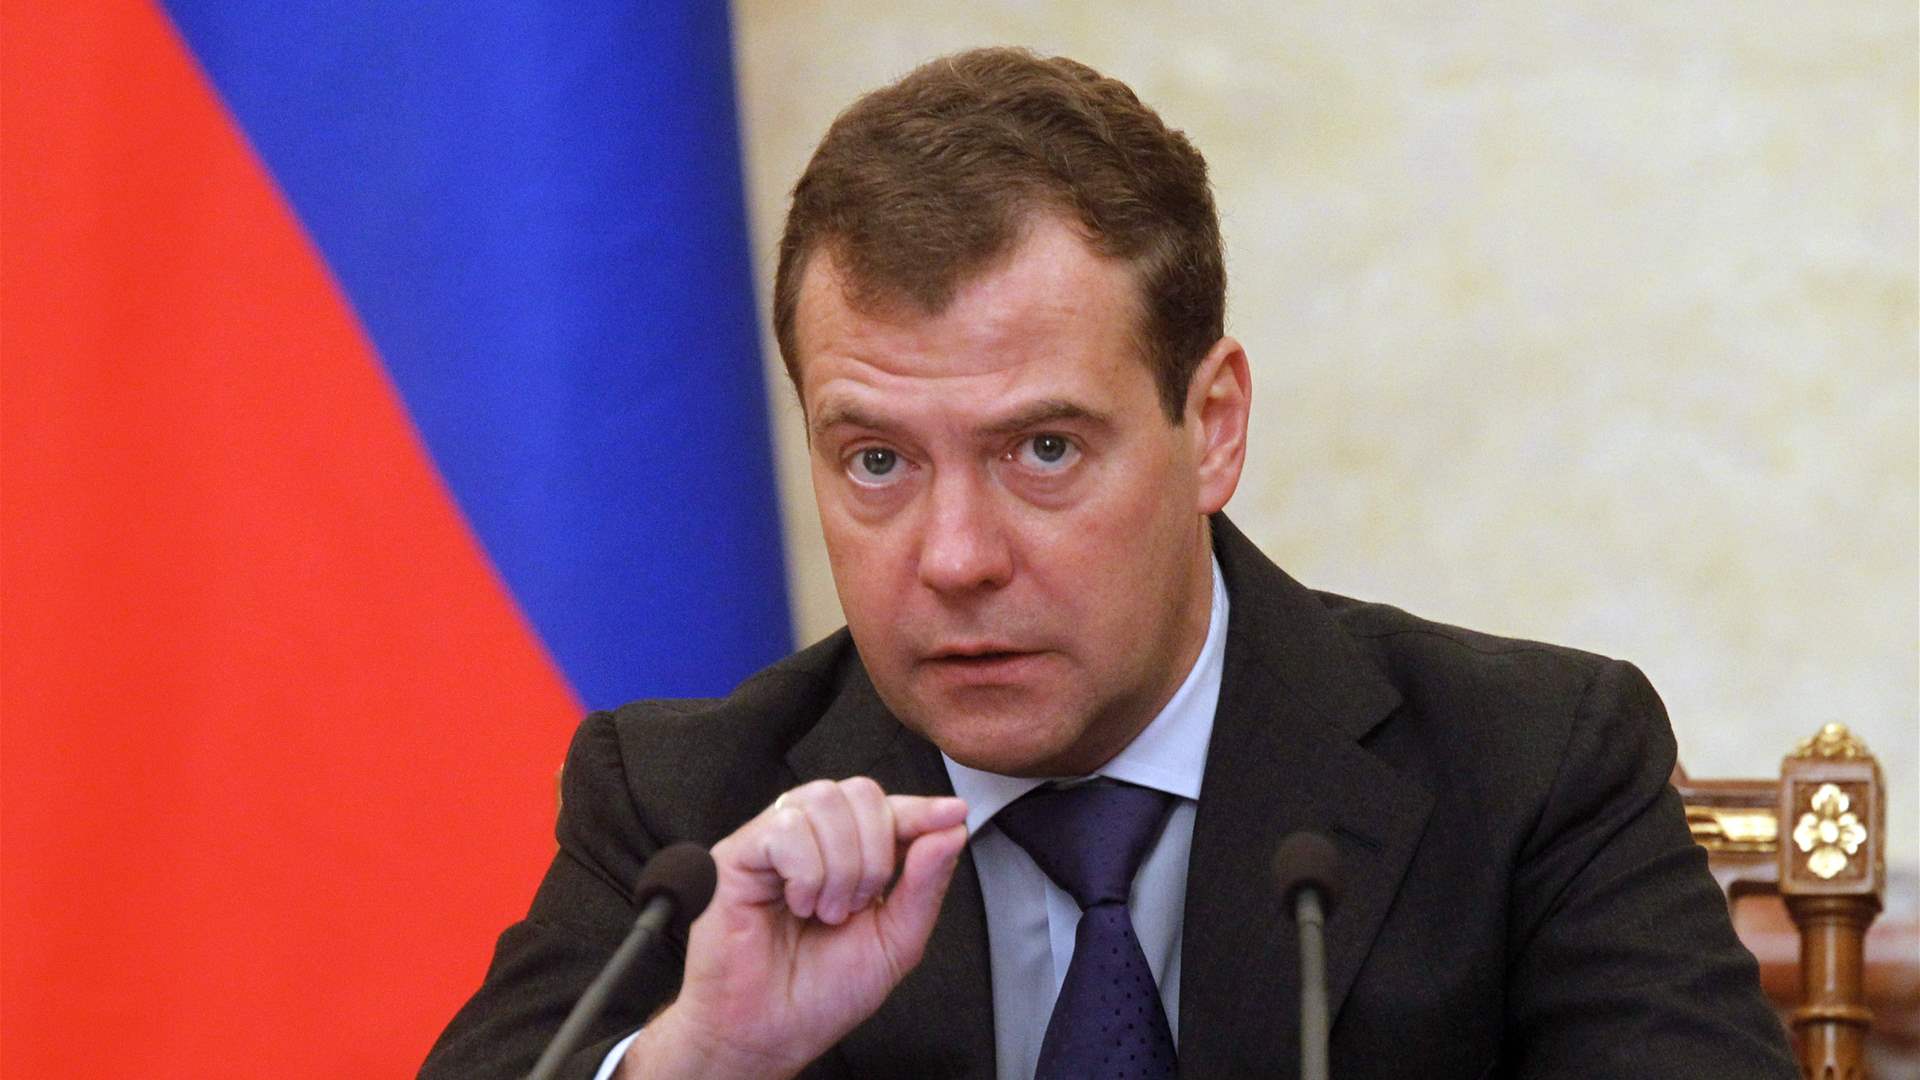 Former Russian president says Ukraine joining NATO would mean war